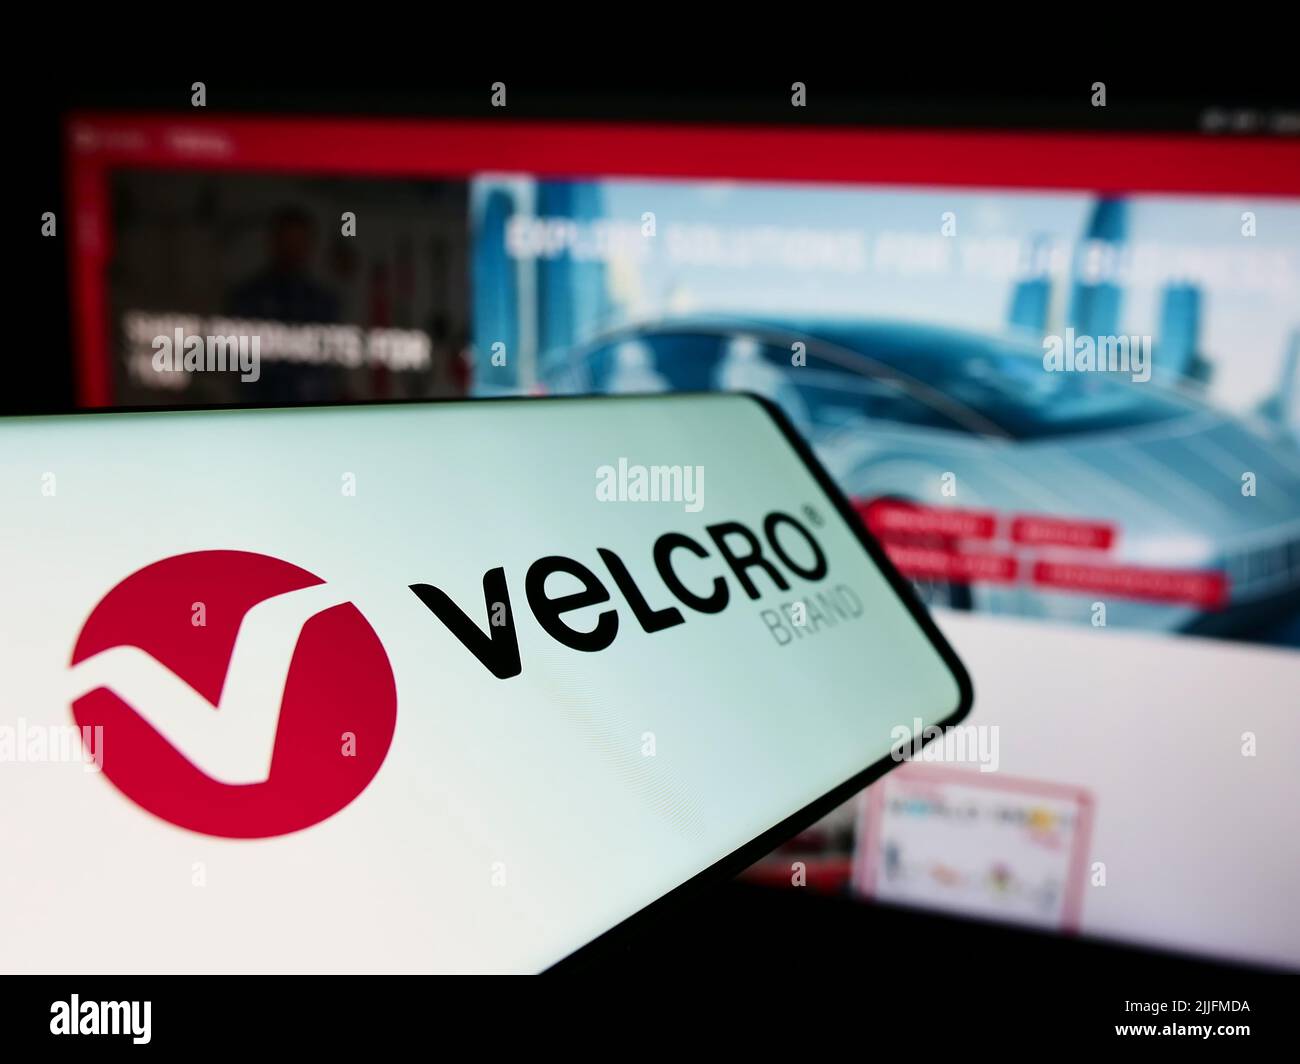 Cellphone with logo of British company Velcro IP Holdings LLC on screen in front of business website. Focus on center-left of phone display. Stock Photo